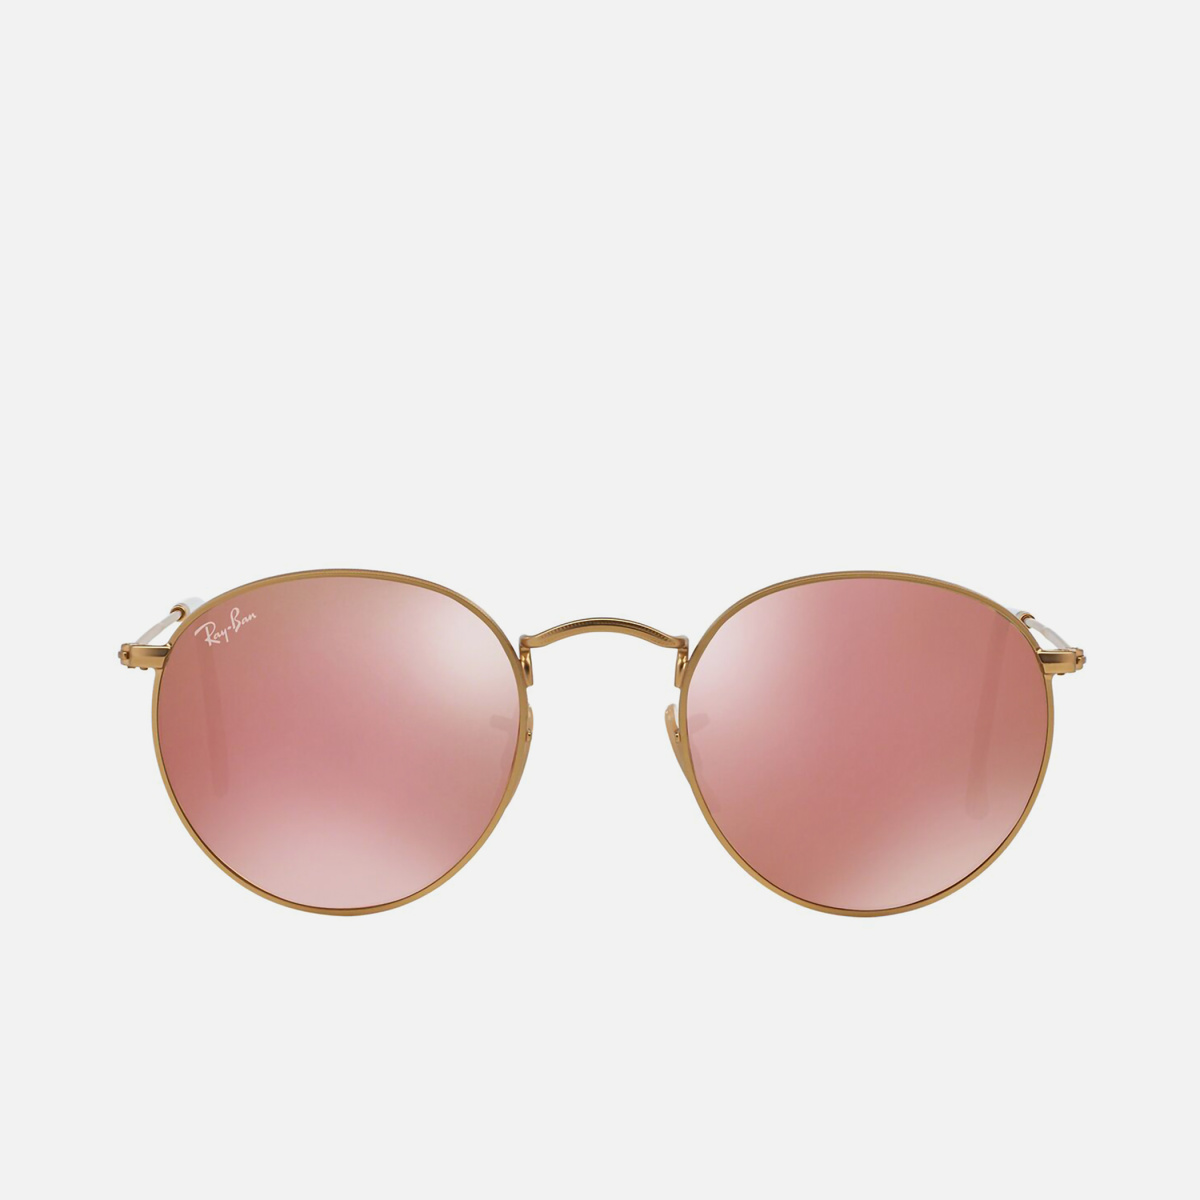 Pepe Jeans Aviator Sunglasses Price in India, Specs, Reviews, Offers,  Coupons | Topprice.in